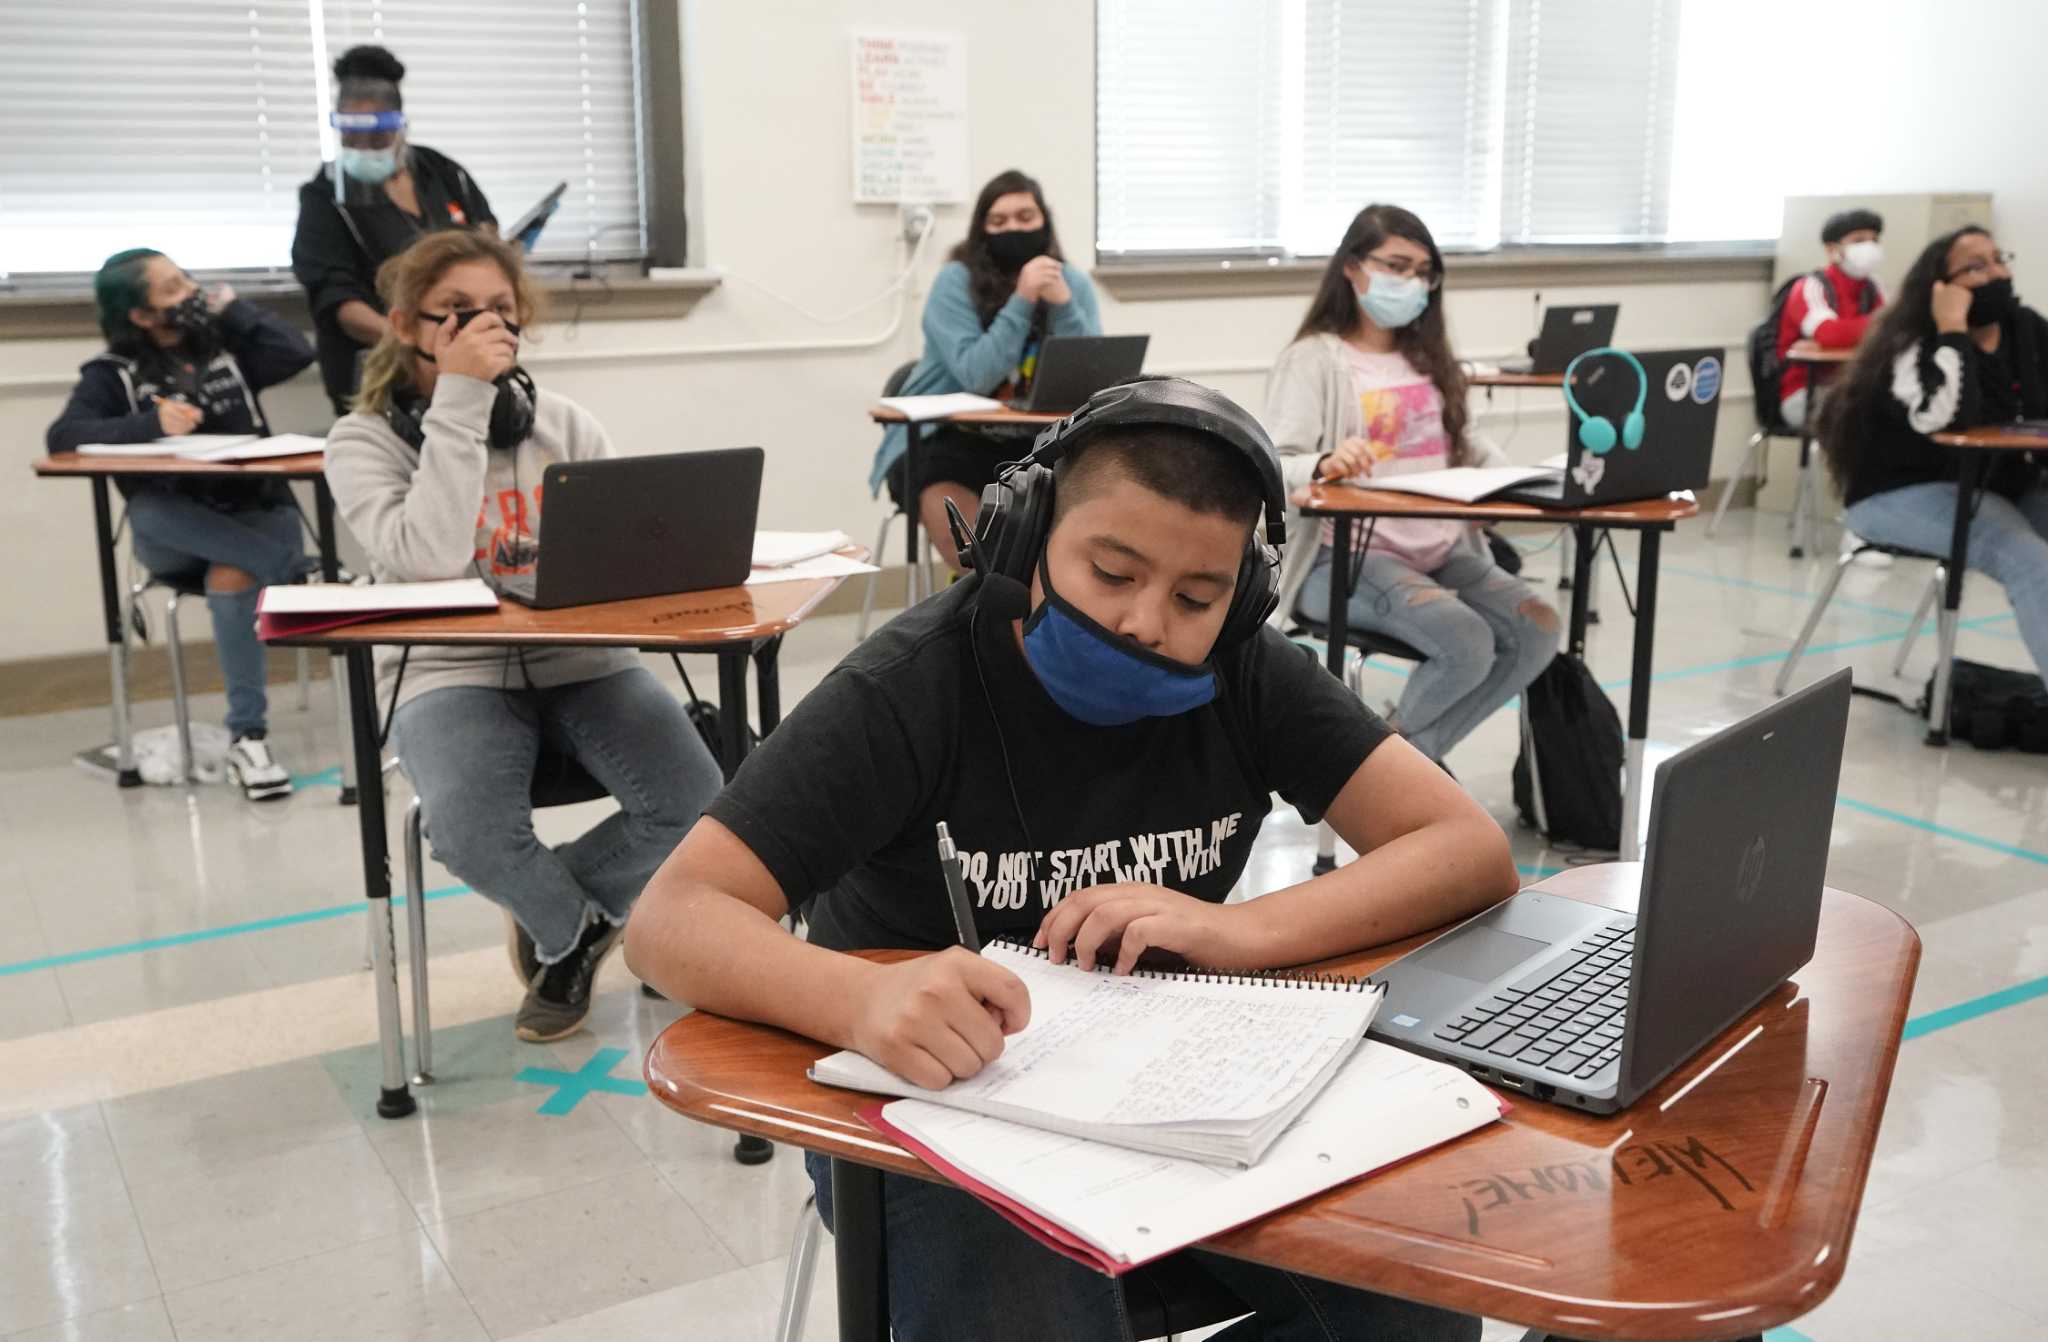 Lack of readiness could cost Texas students 104 billion as adults